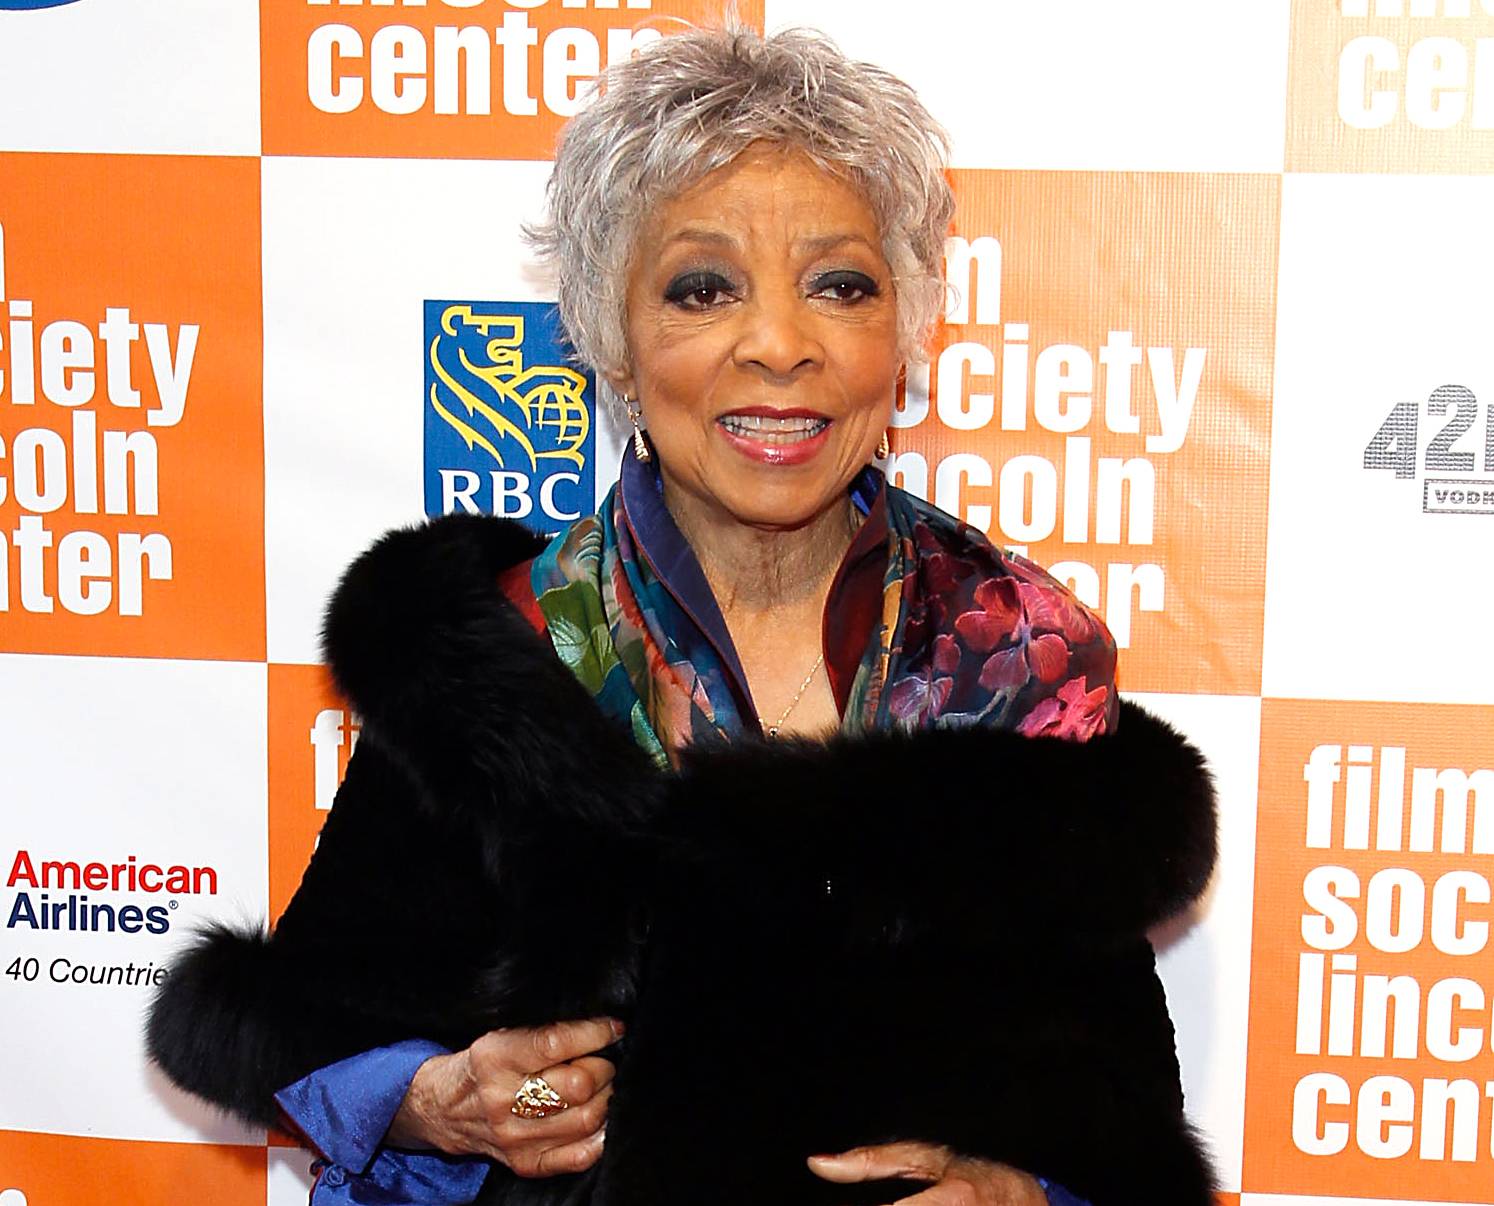 Ruby Dee&nbsp; - The acting legend’s Twitter death rumor circulated simply because someone mistweeted. Someone told followers that Ruby Dee died instead of correctly stating that rapper Heavy D had passed away.(Photo: Mark Von Holden/Getty Images)